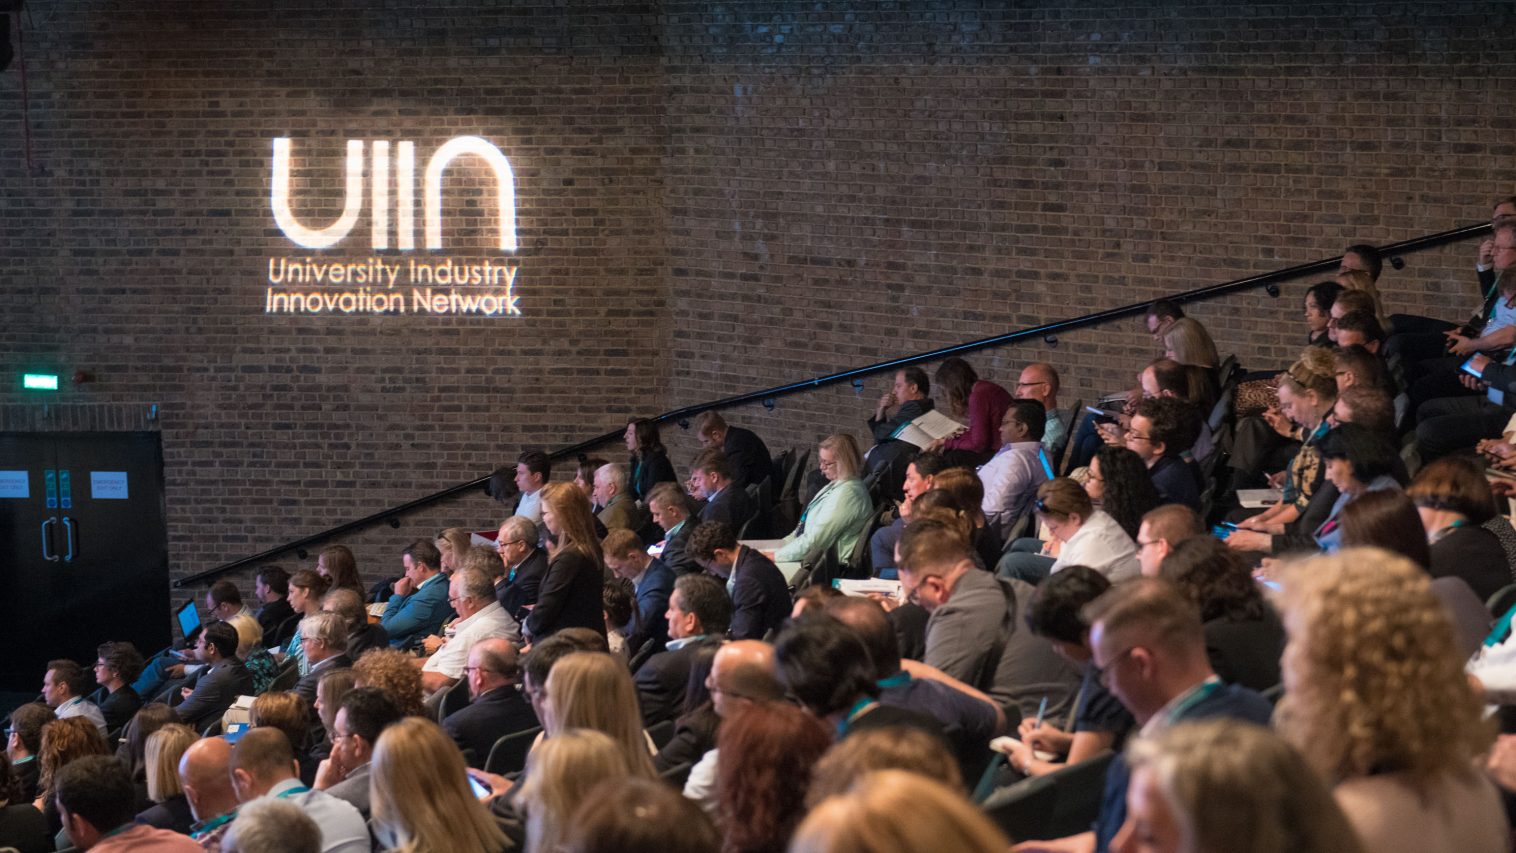 Crowded auditorium at UIIN conference with UIIN logo projected onto wall